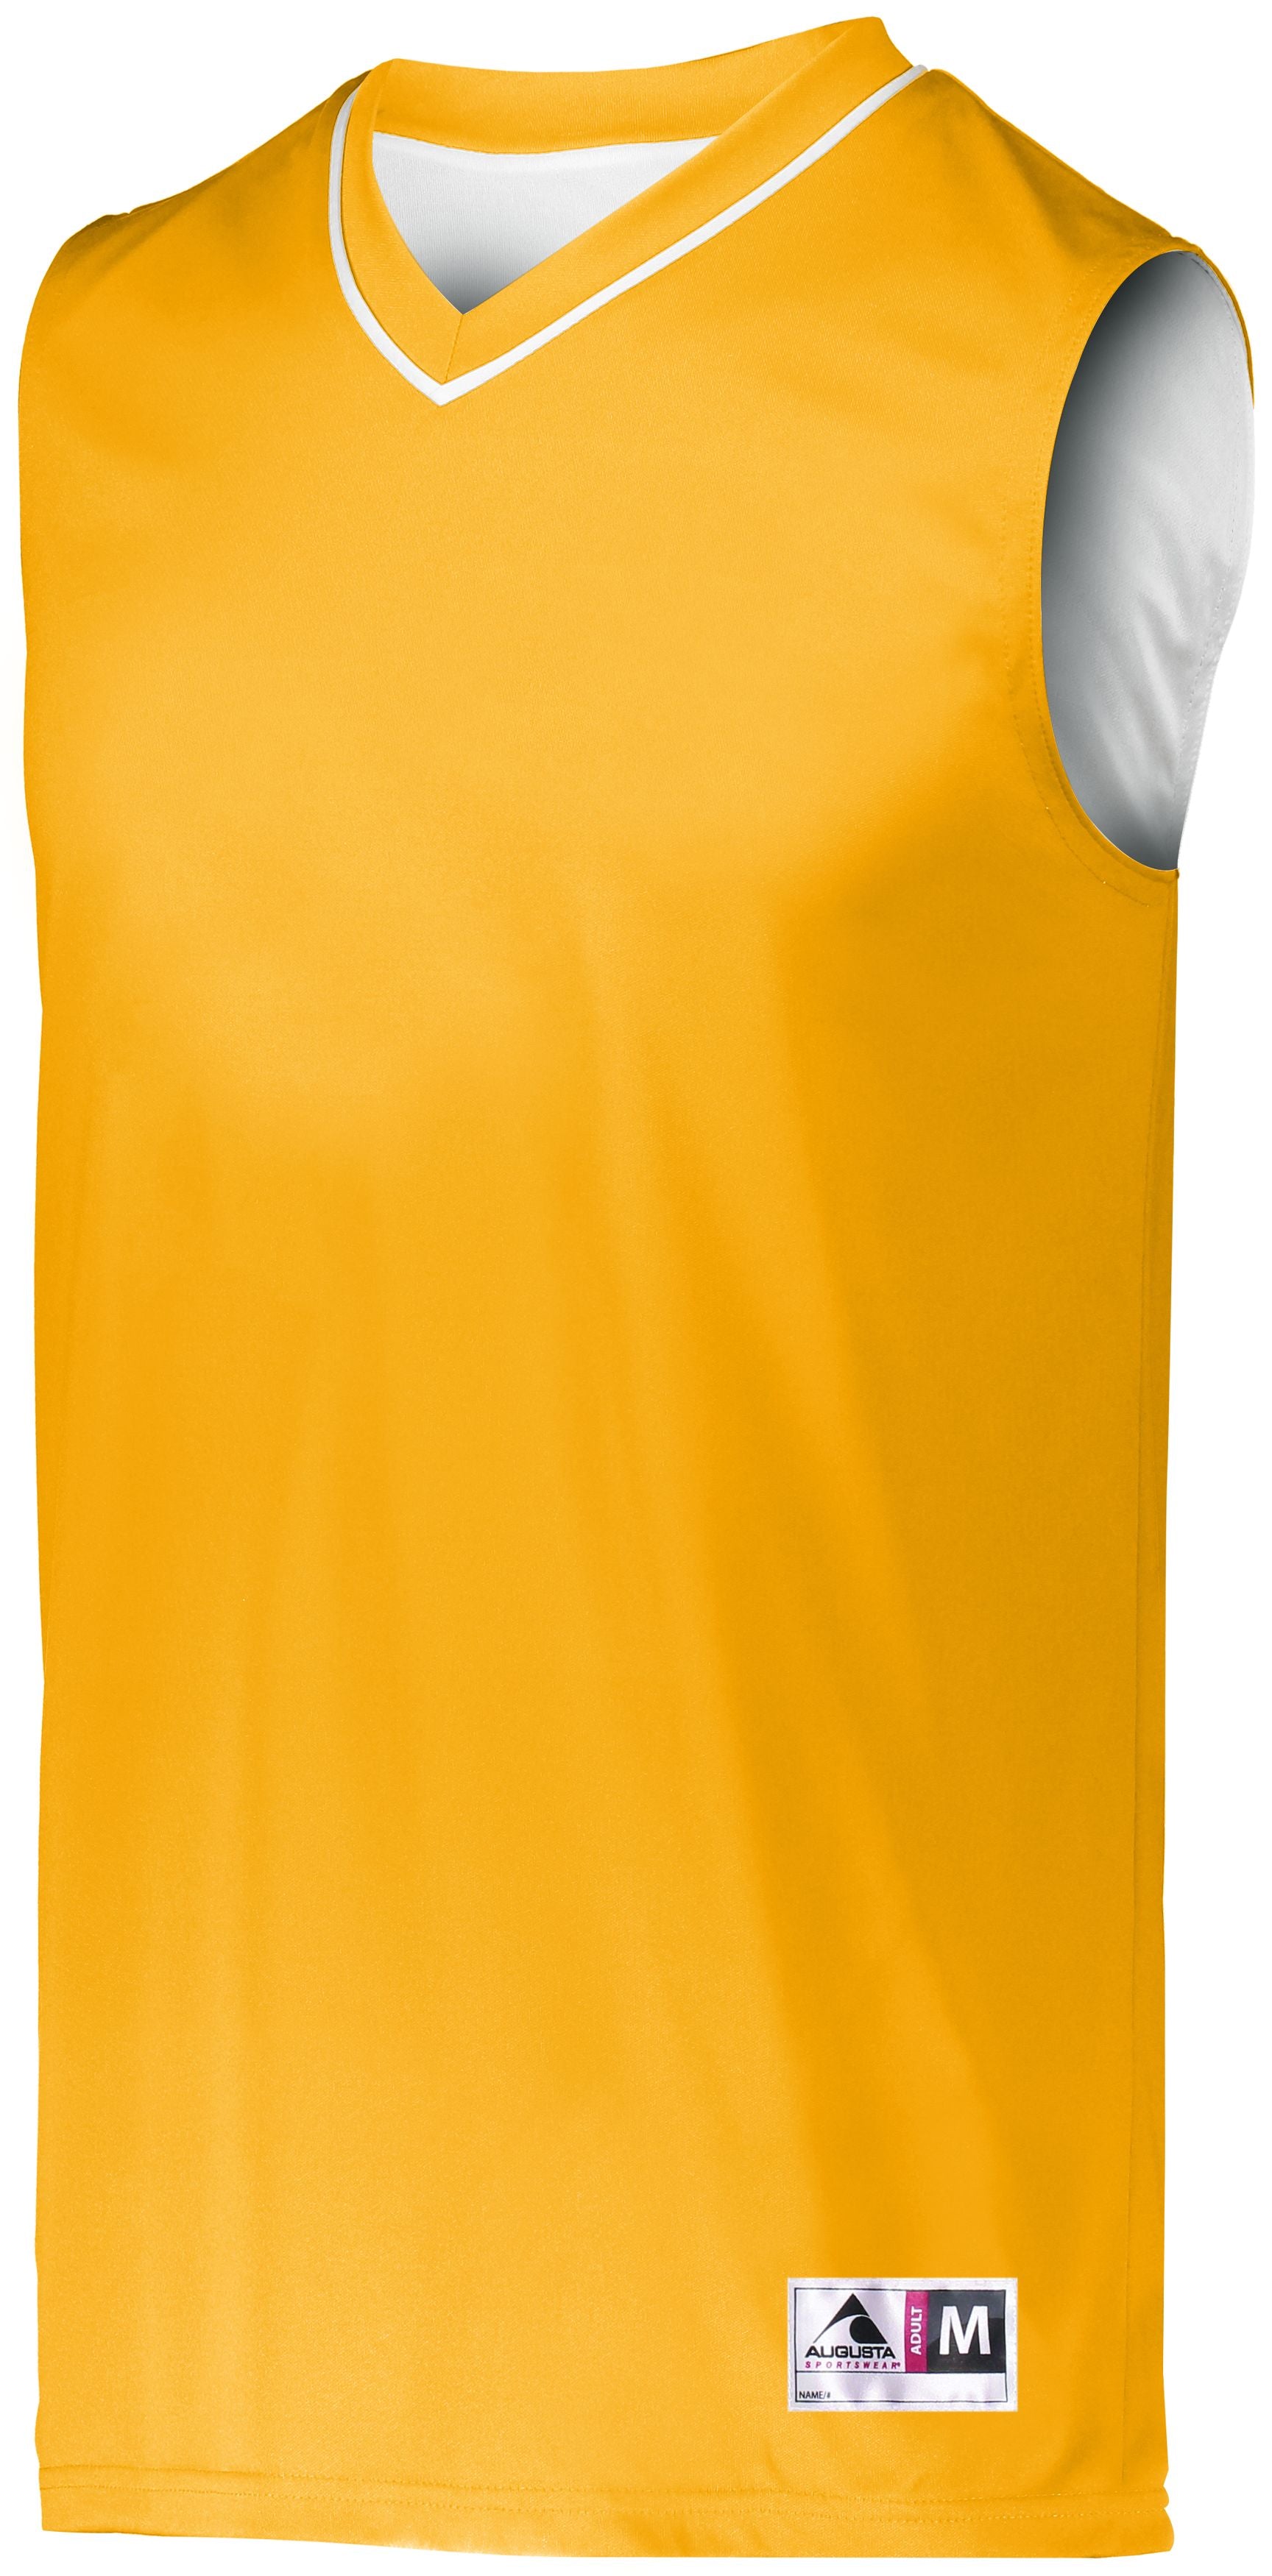 Augusta Sportswear Reversible Two-Color Jersey in Gold/White  -Part of the Adult, Adult-Jersey, Augusta-Products, Basketball, Shirts, All-Sports, All-Sports-1 product lines at KanaleyCreations.com